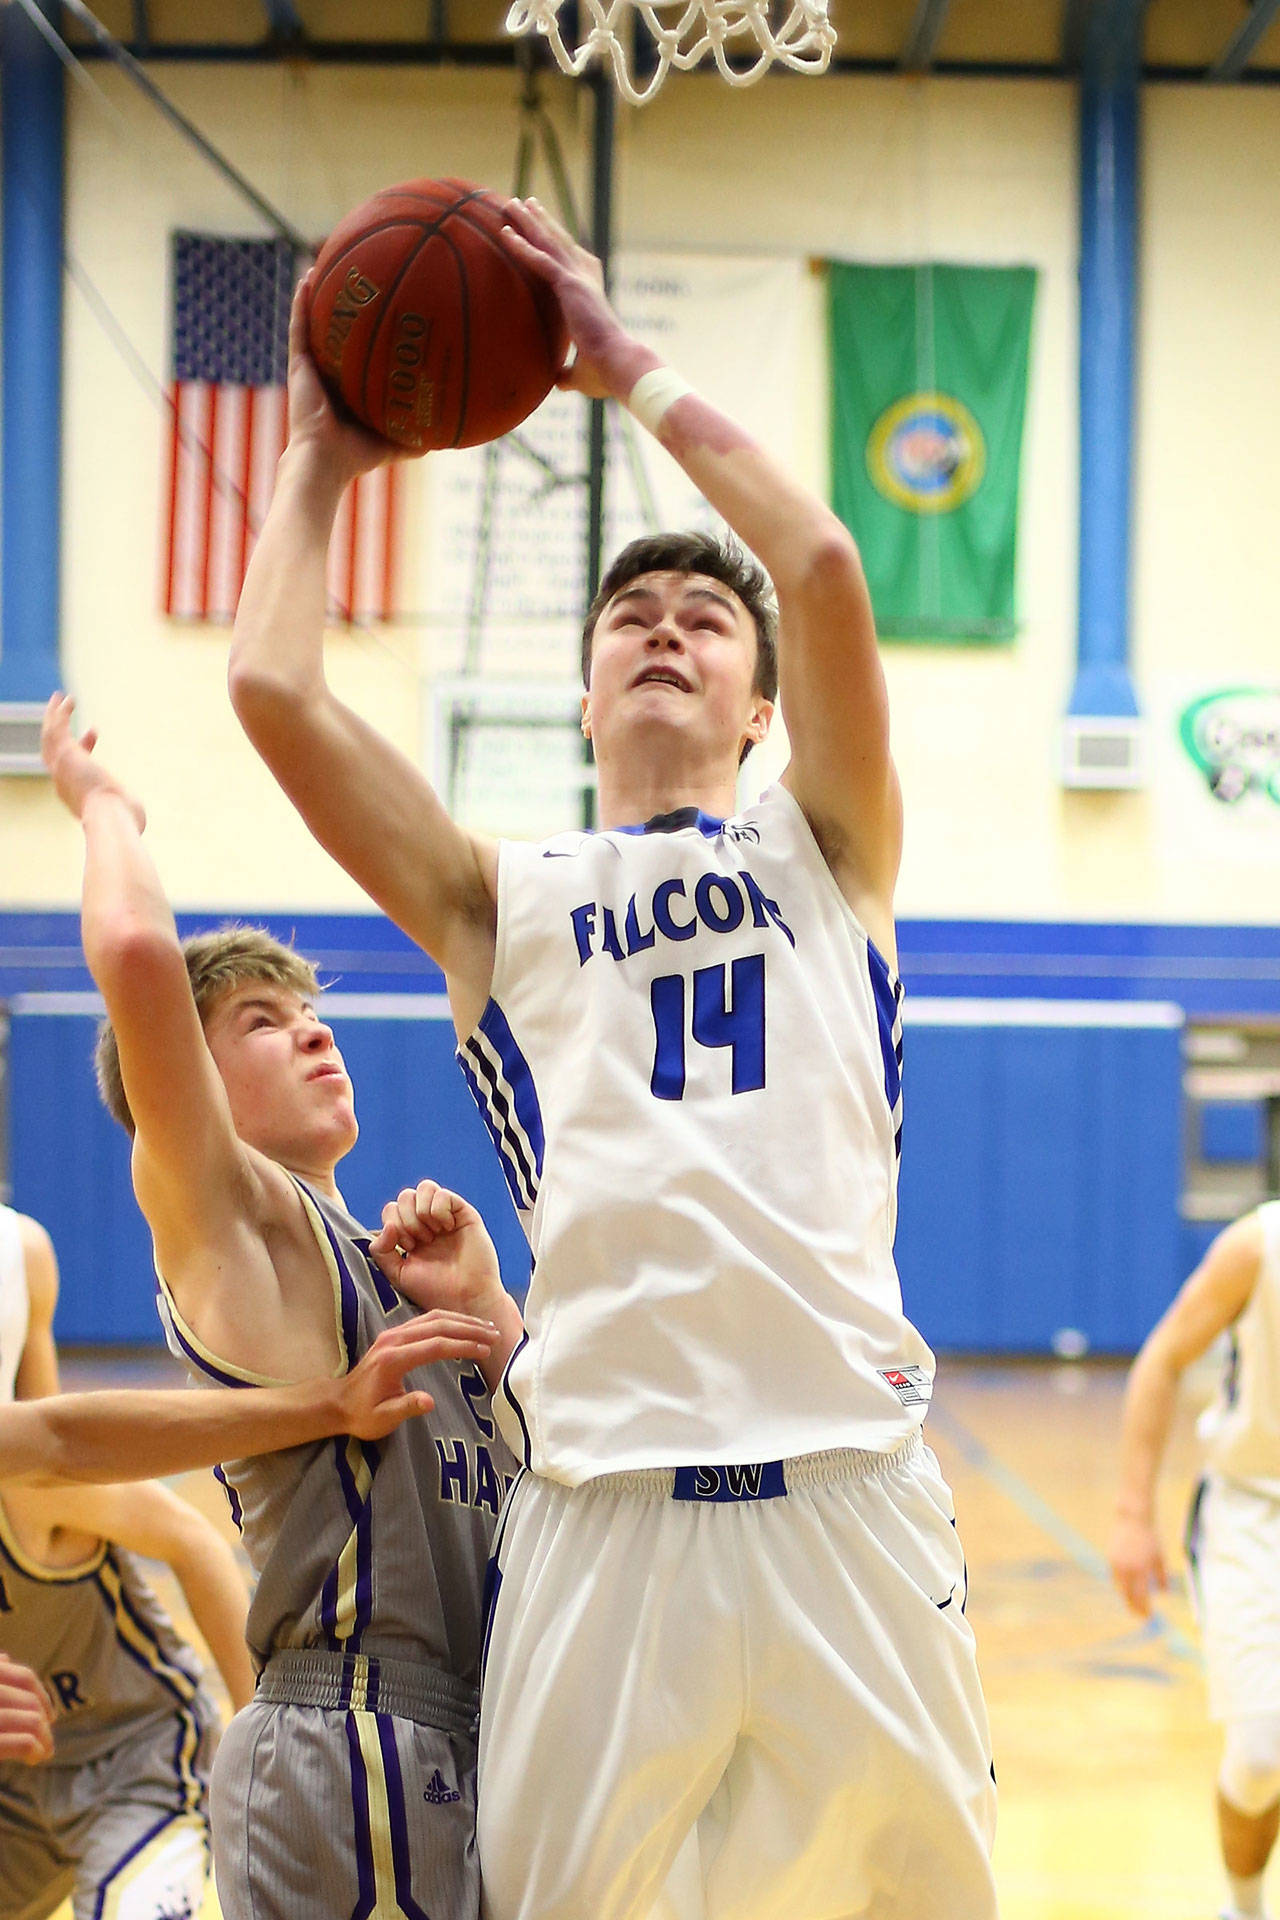 Brady Hezel (14) puts up a shot for South Whidbey.(Photo by John Fisken)